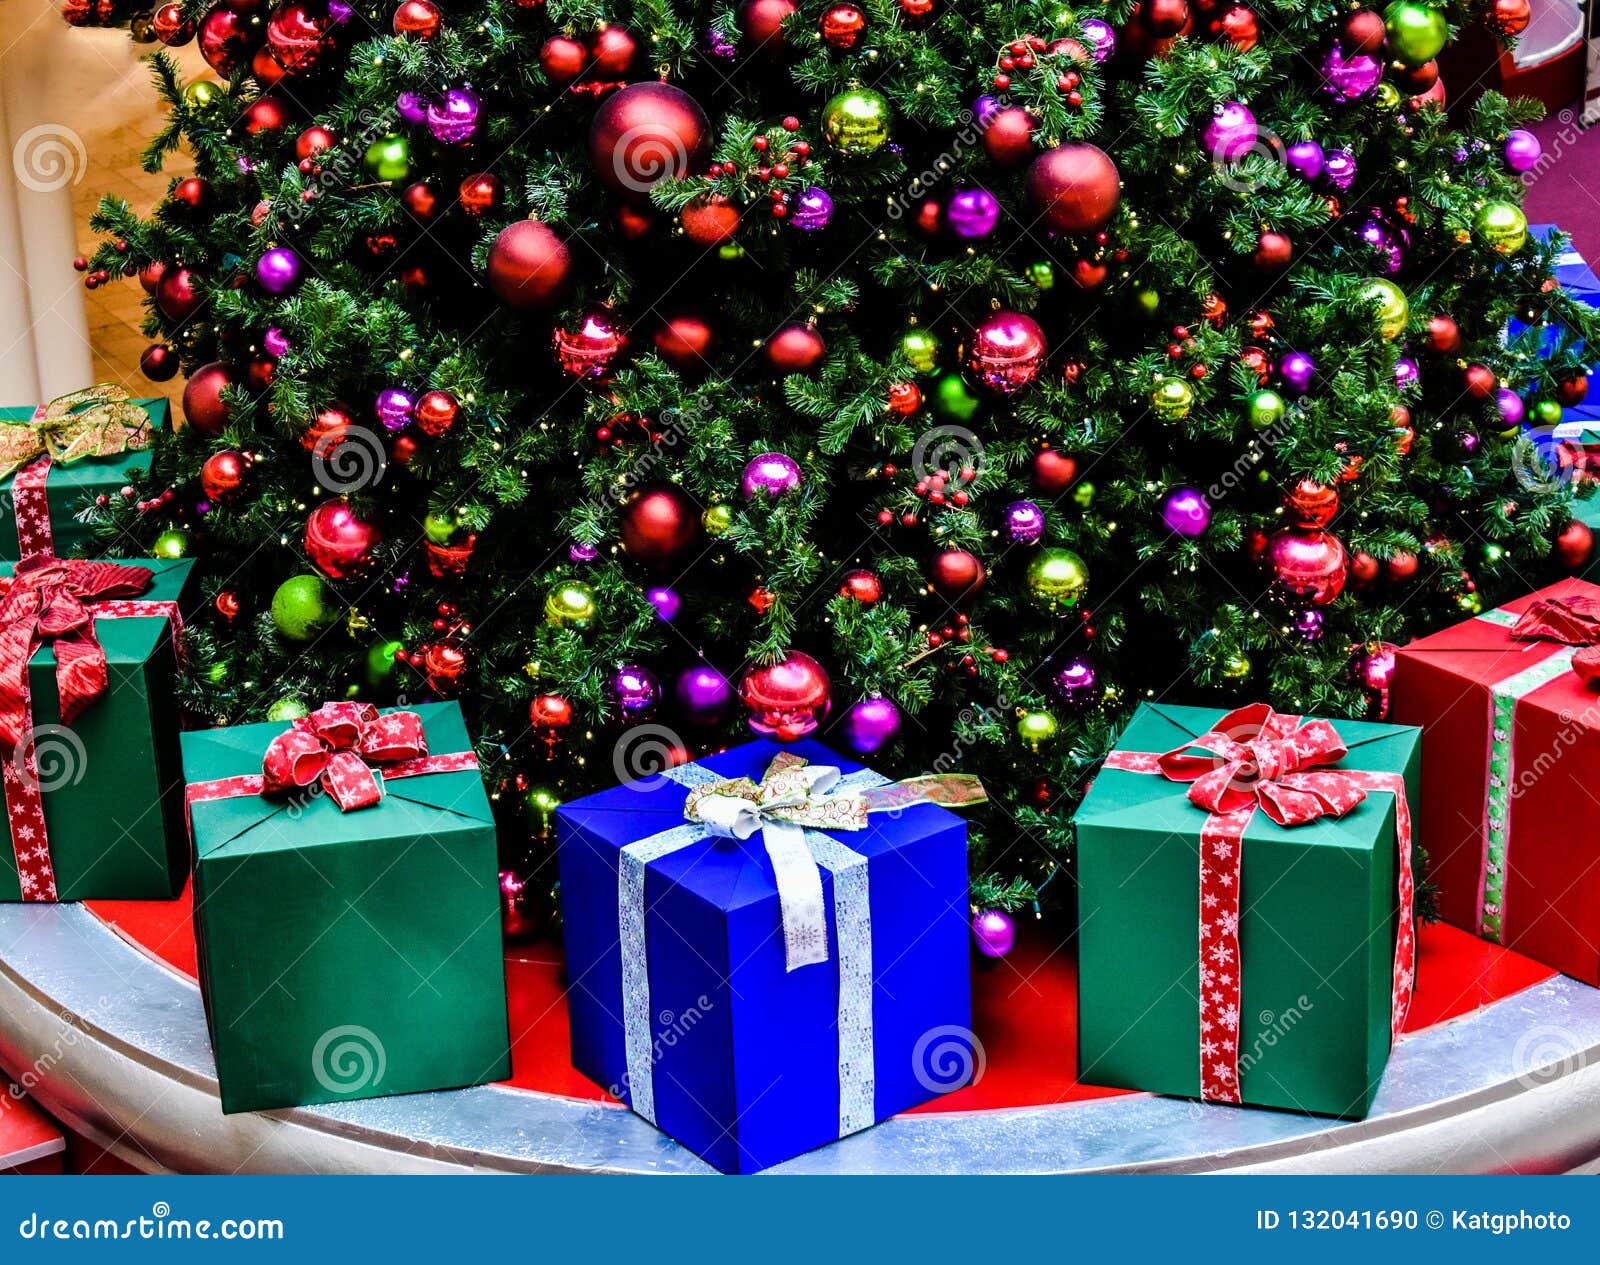 Decorated Christmas Tree with Gift Boxes Stock Photo Image of winter